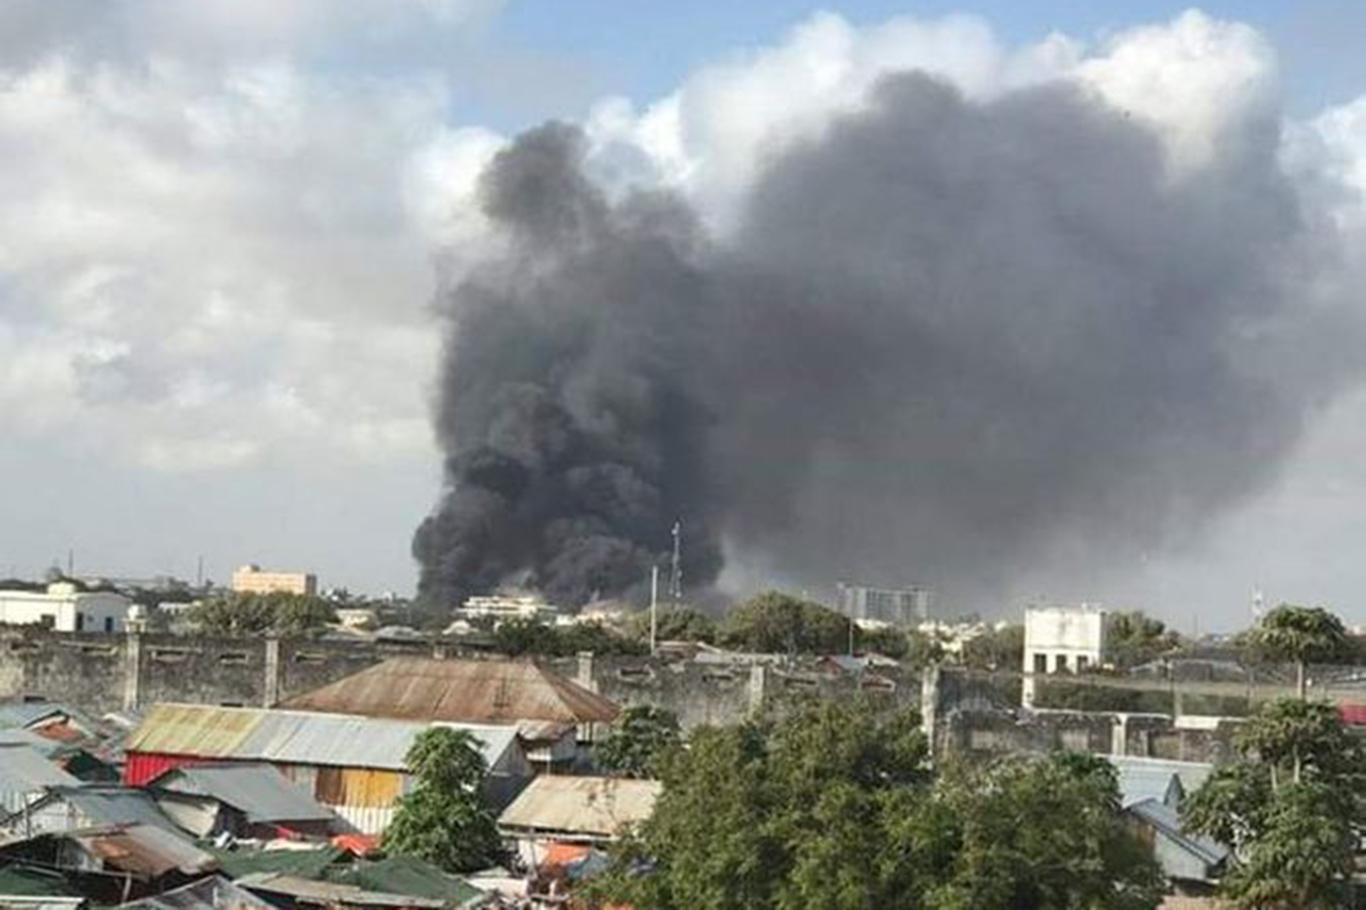 Somalia: 5 people died, 7 injured in two explosions